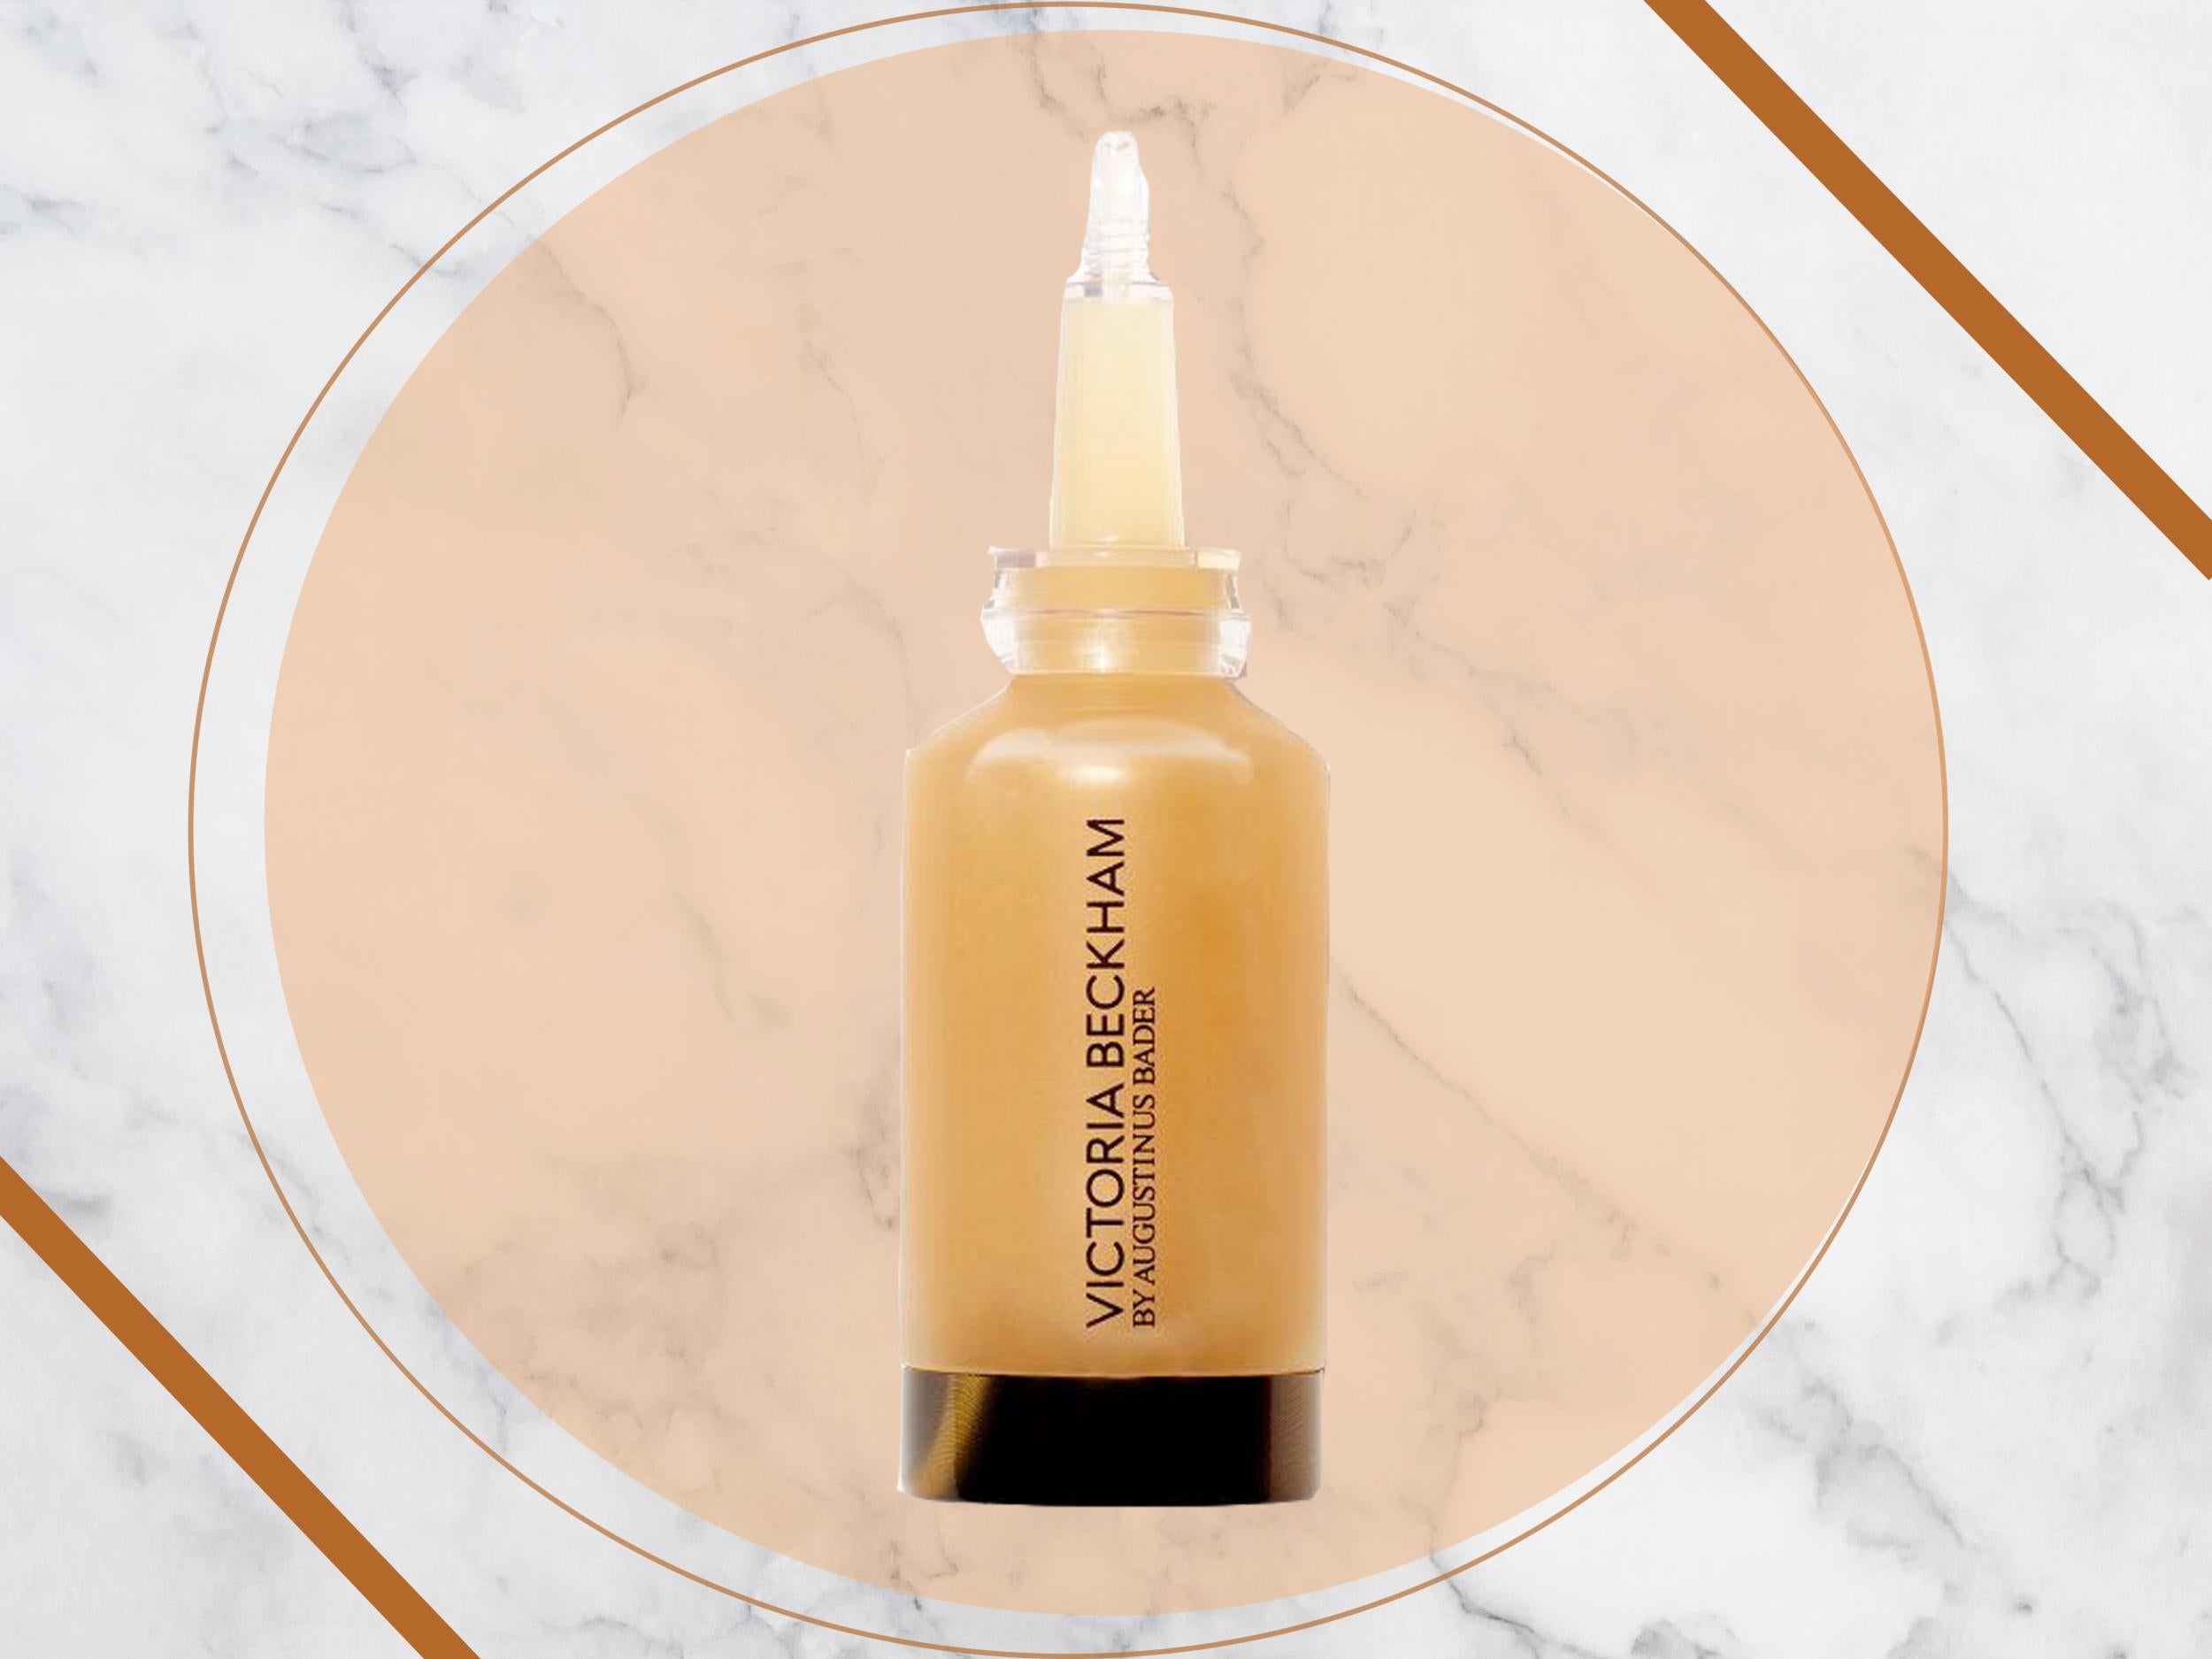 The serum boosts your skin into healing mode, tackling signs of ageing and protecting from environmental aggressors